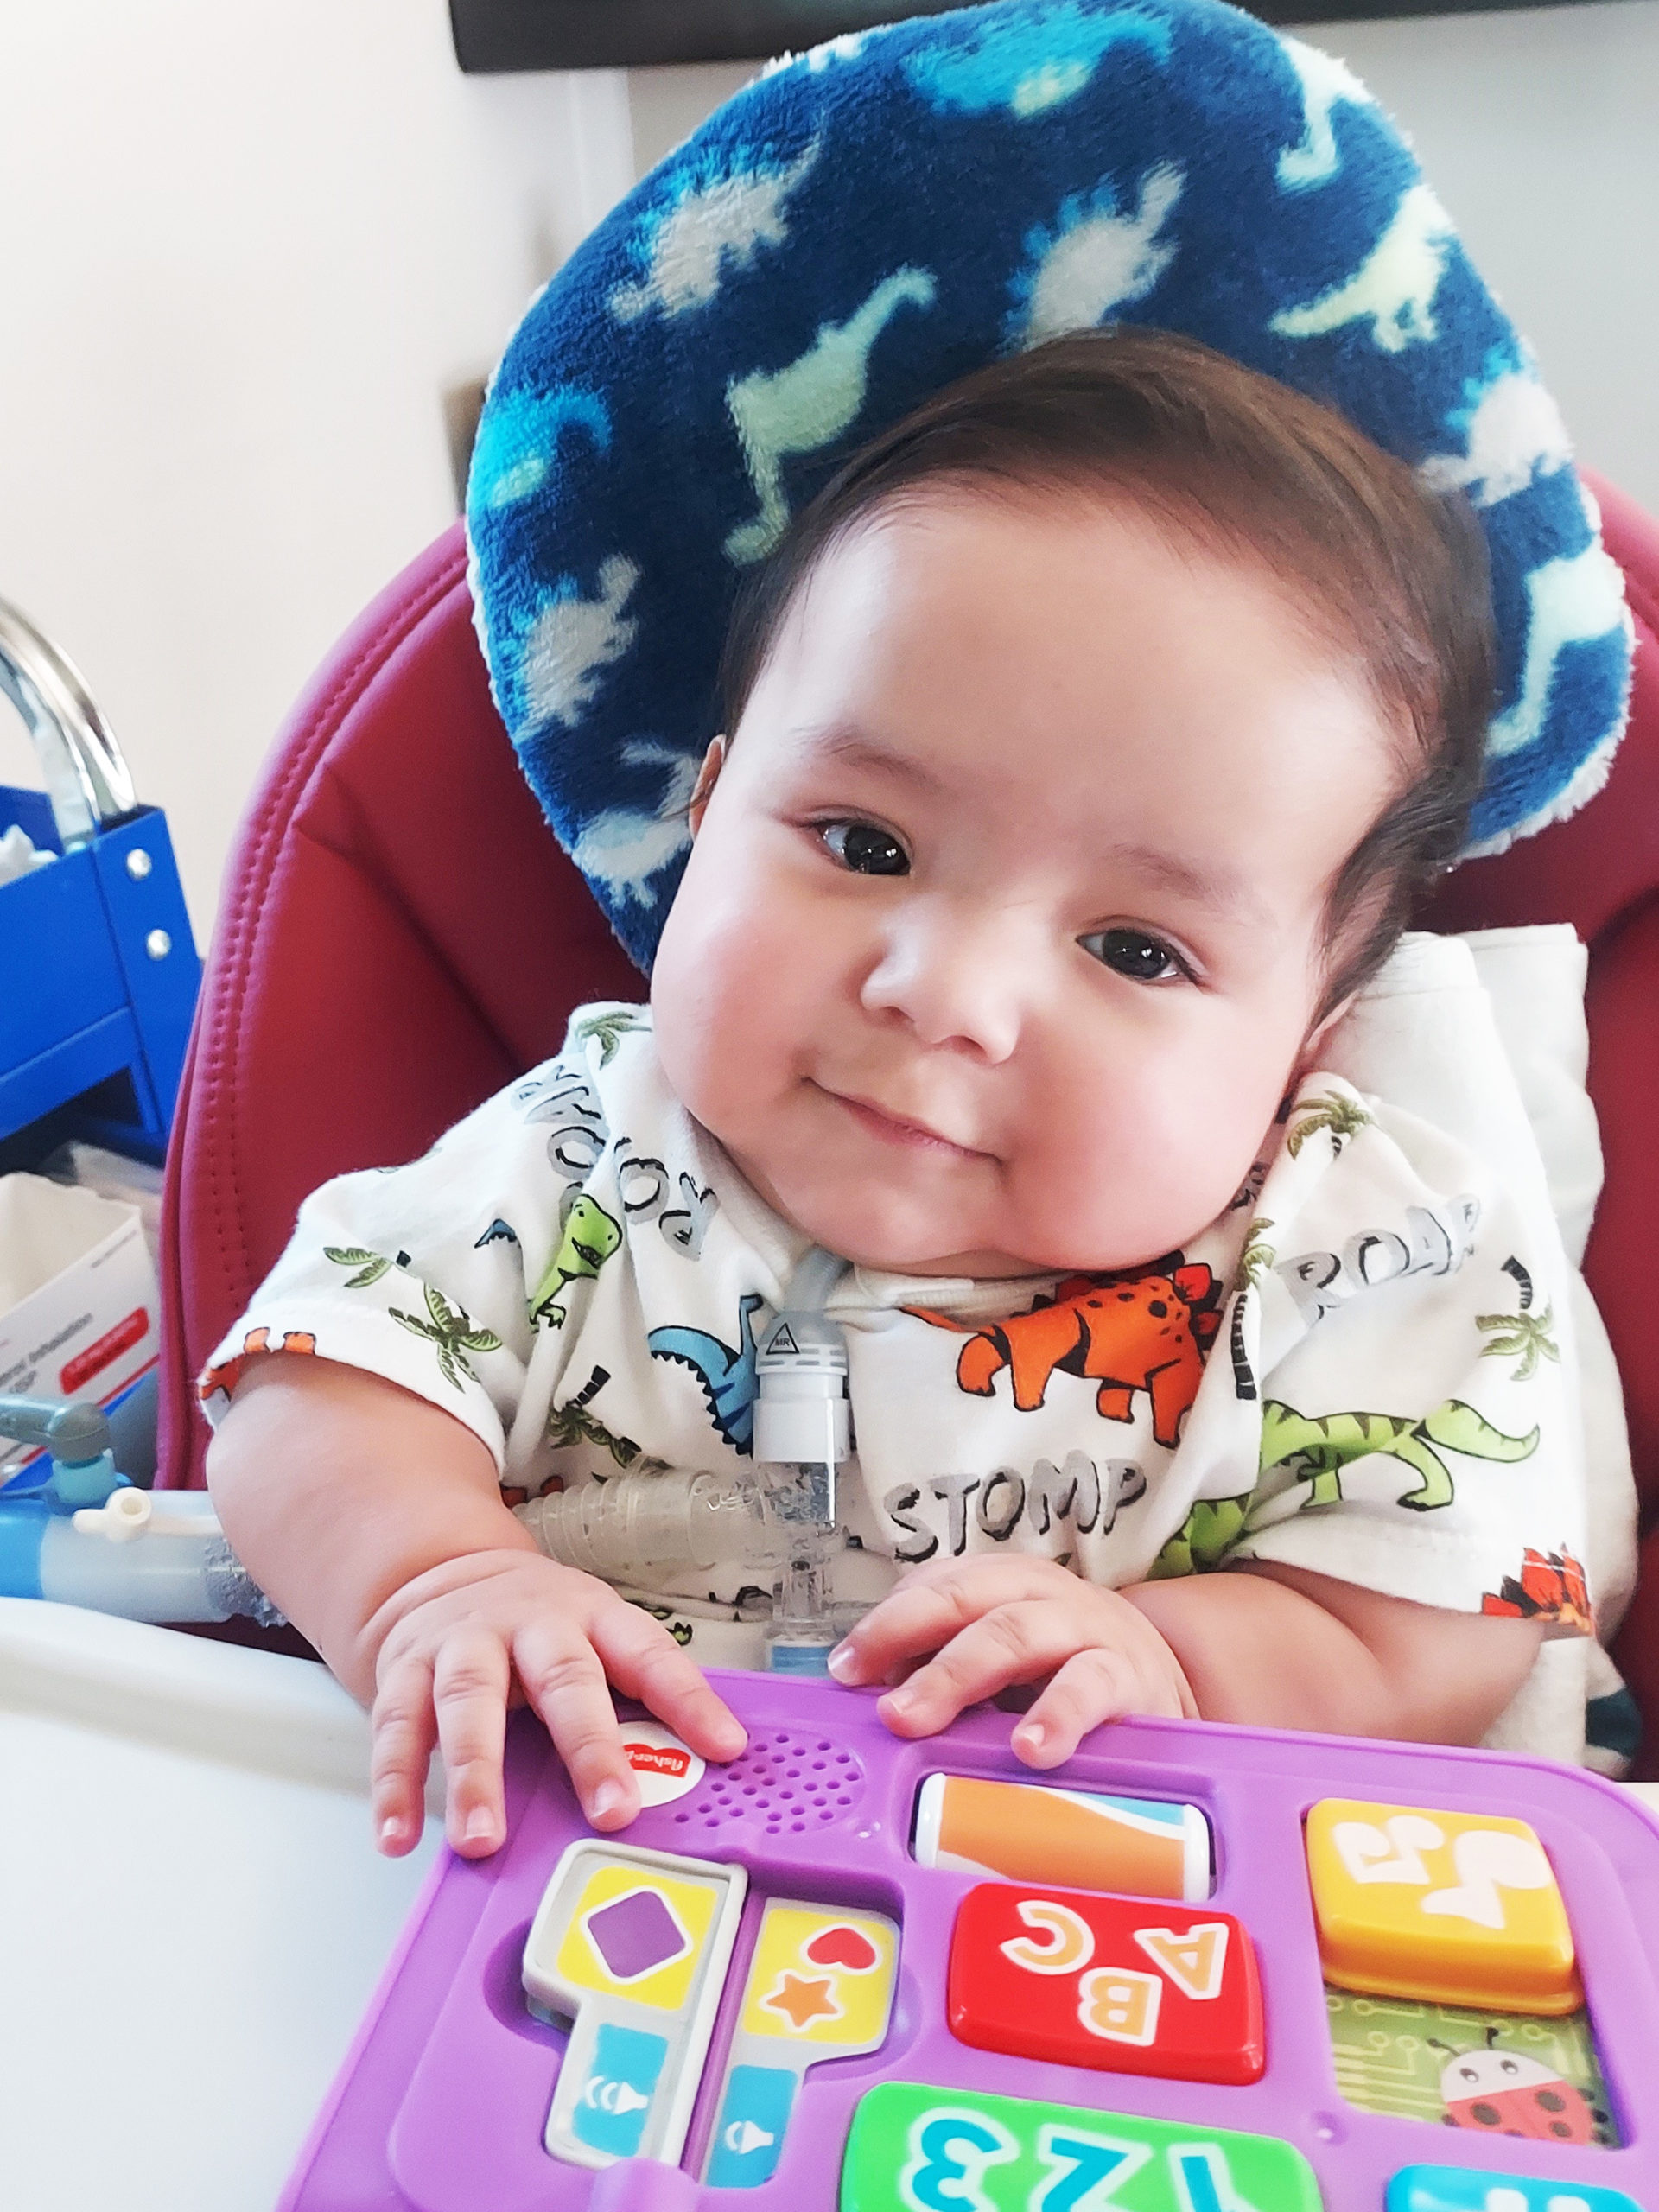 Large chest mass poses big challenges: Freddy's NICU story